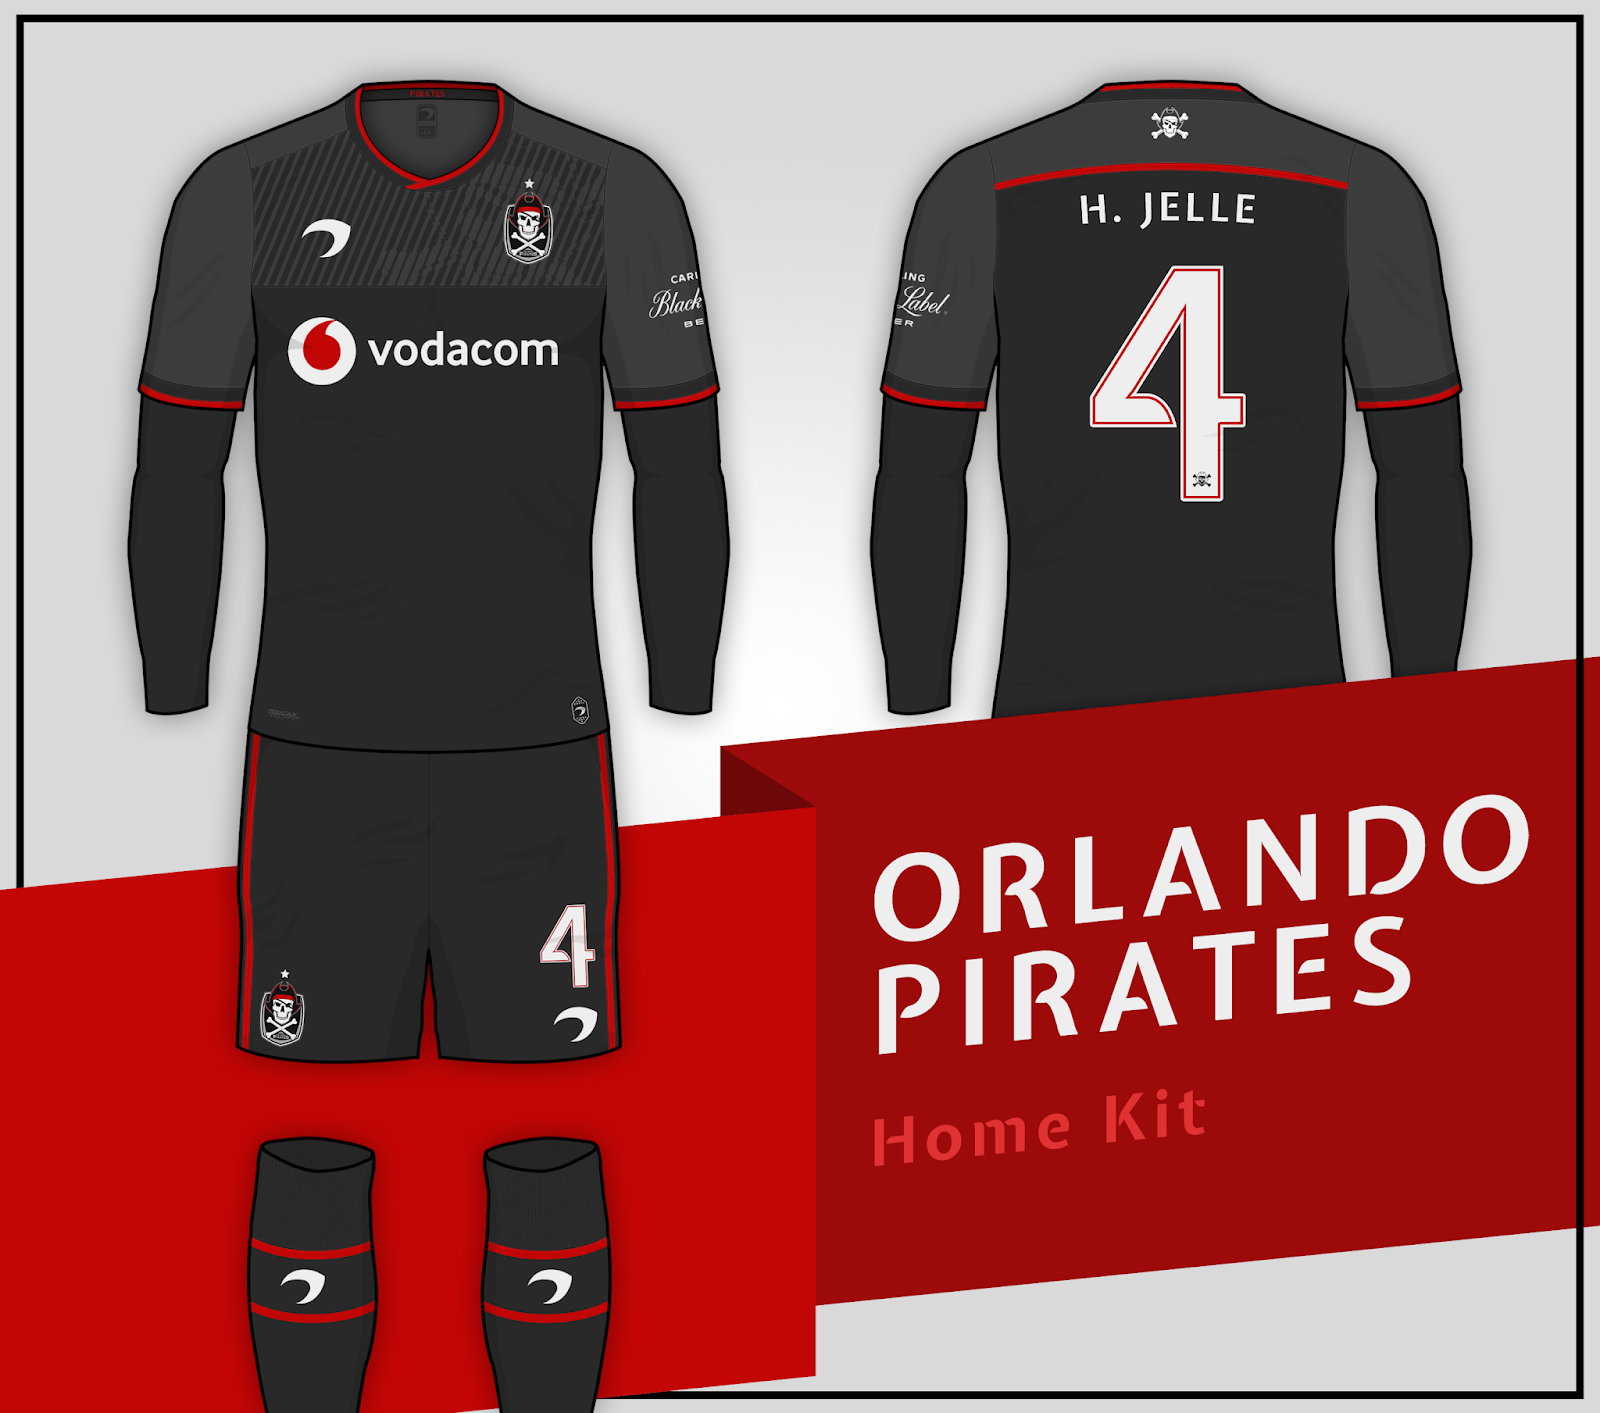 new kit for pirates